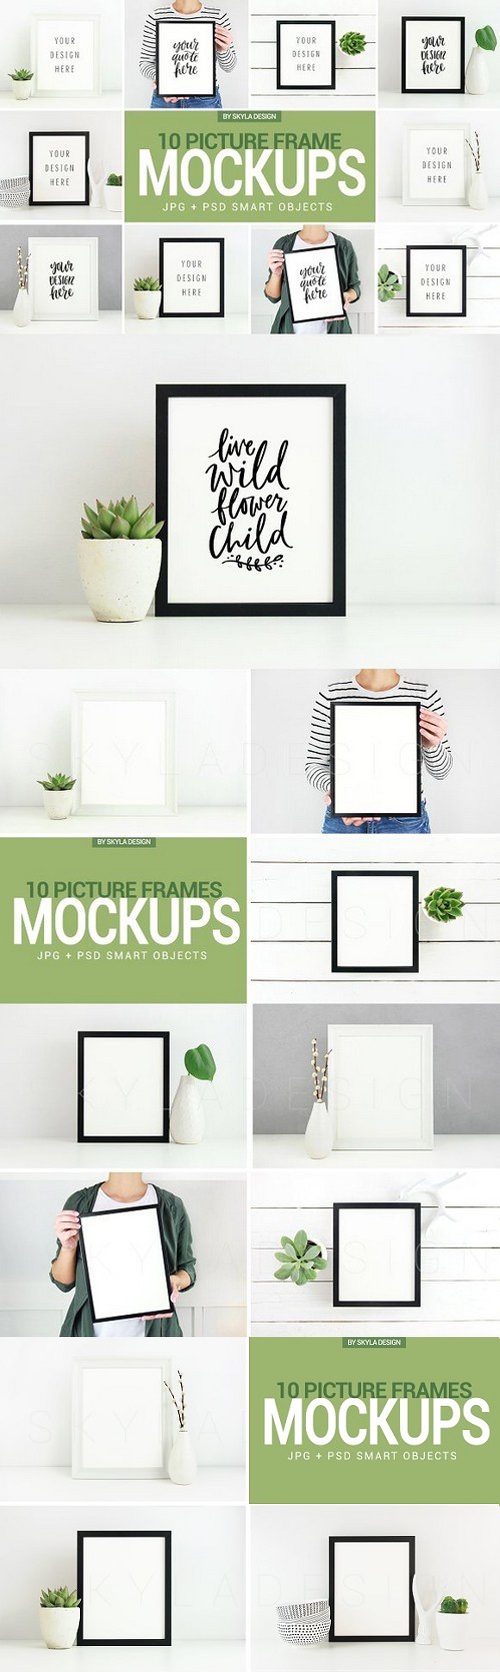 Poster & Picture frame mockup photos 1436427